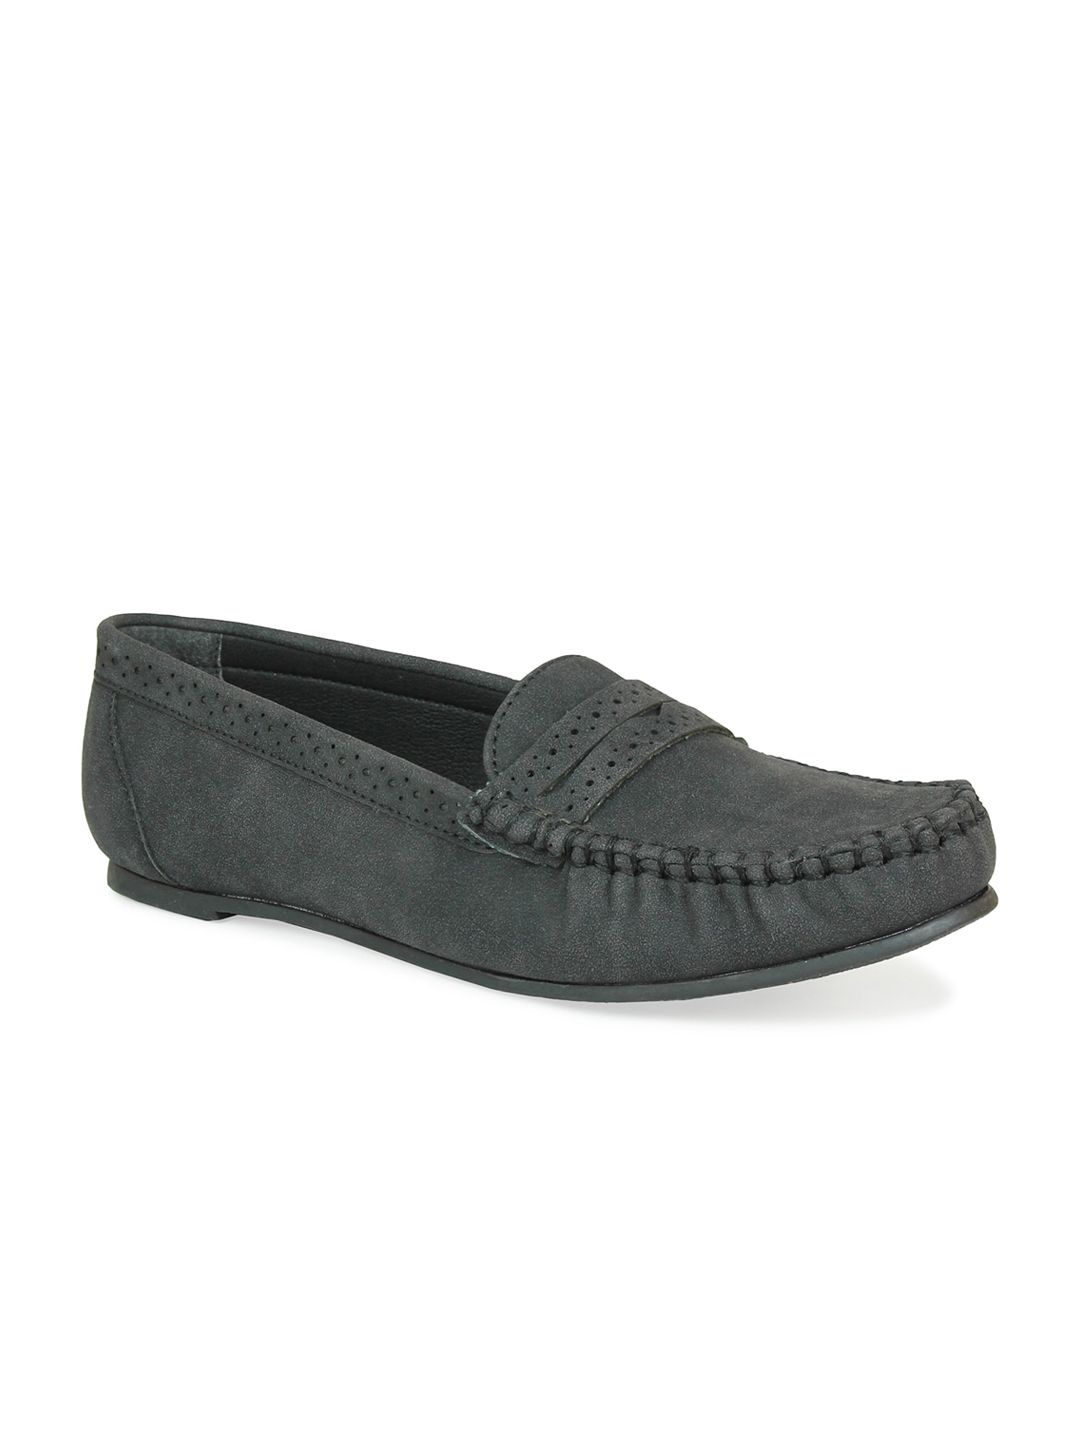 DESIGN CREW Women Black Solid Penny Loafers Price in India